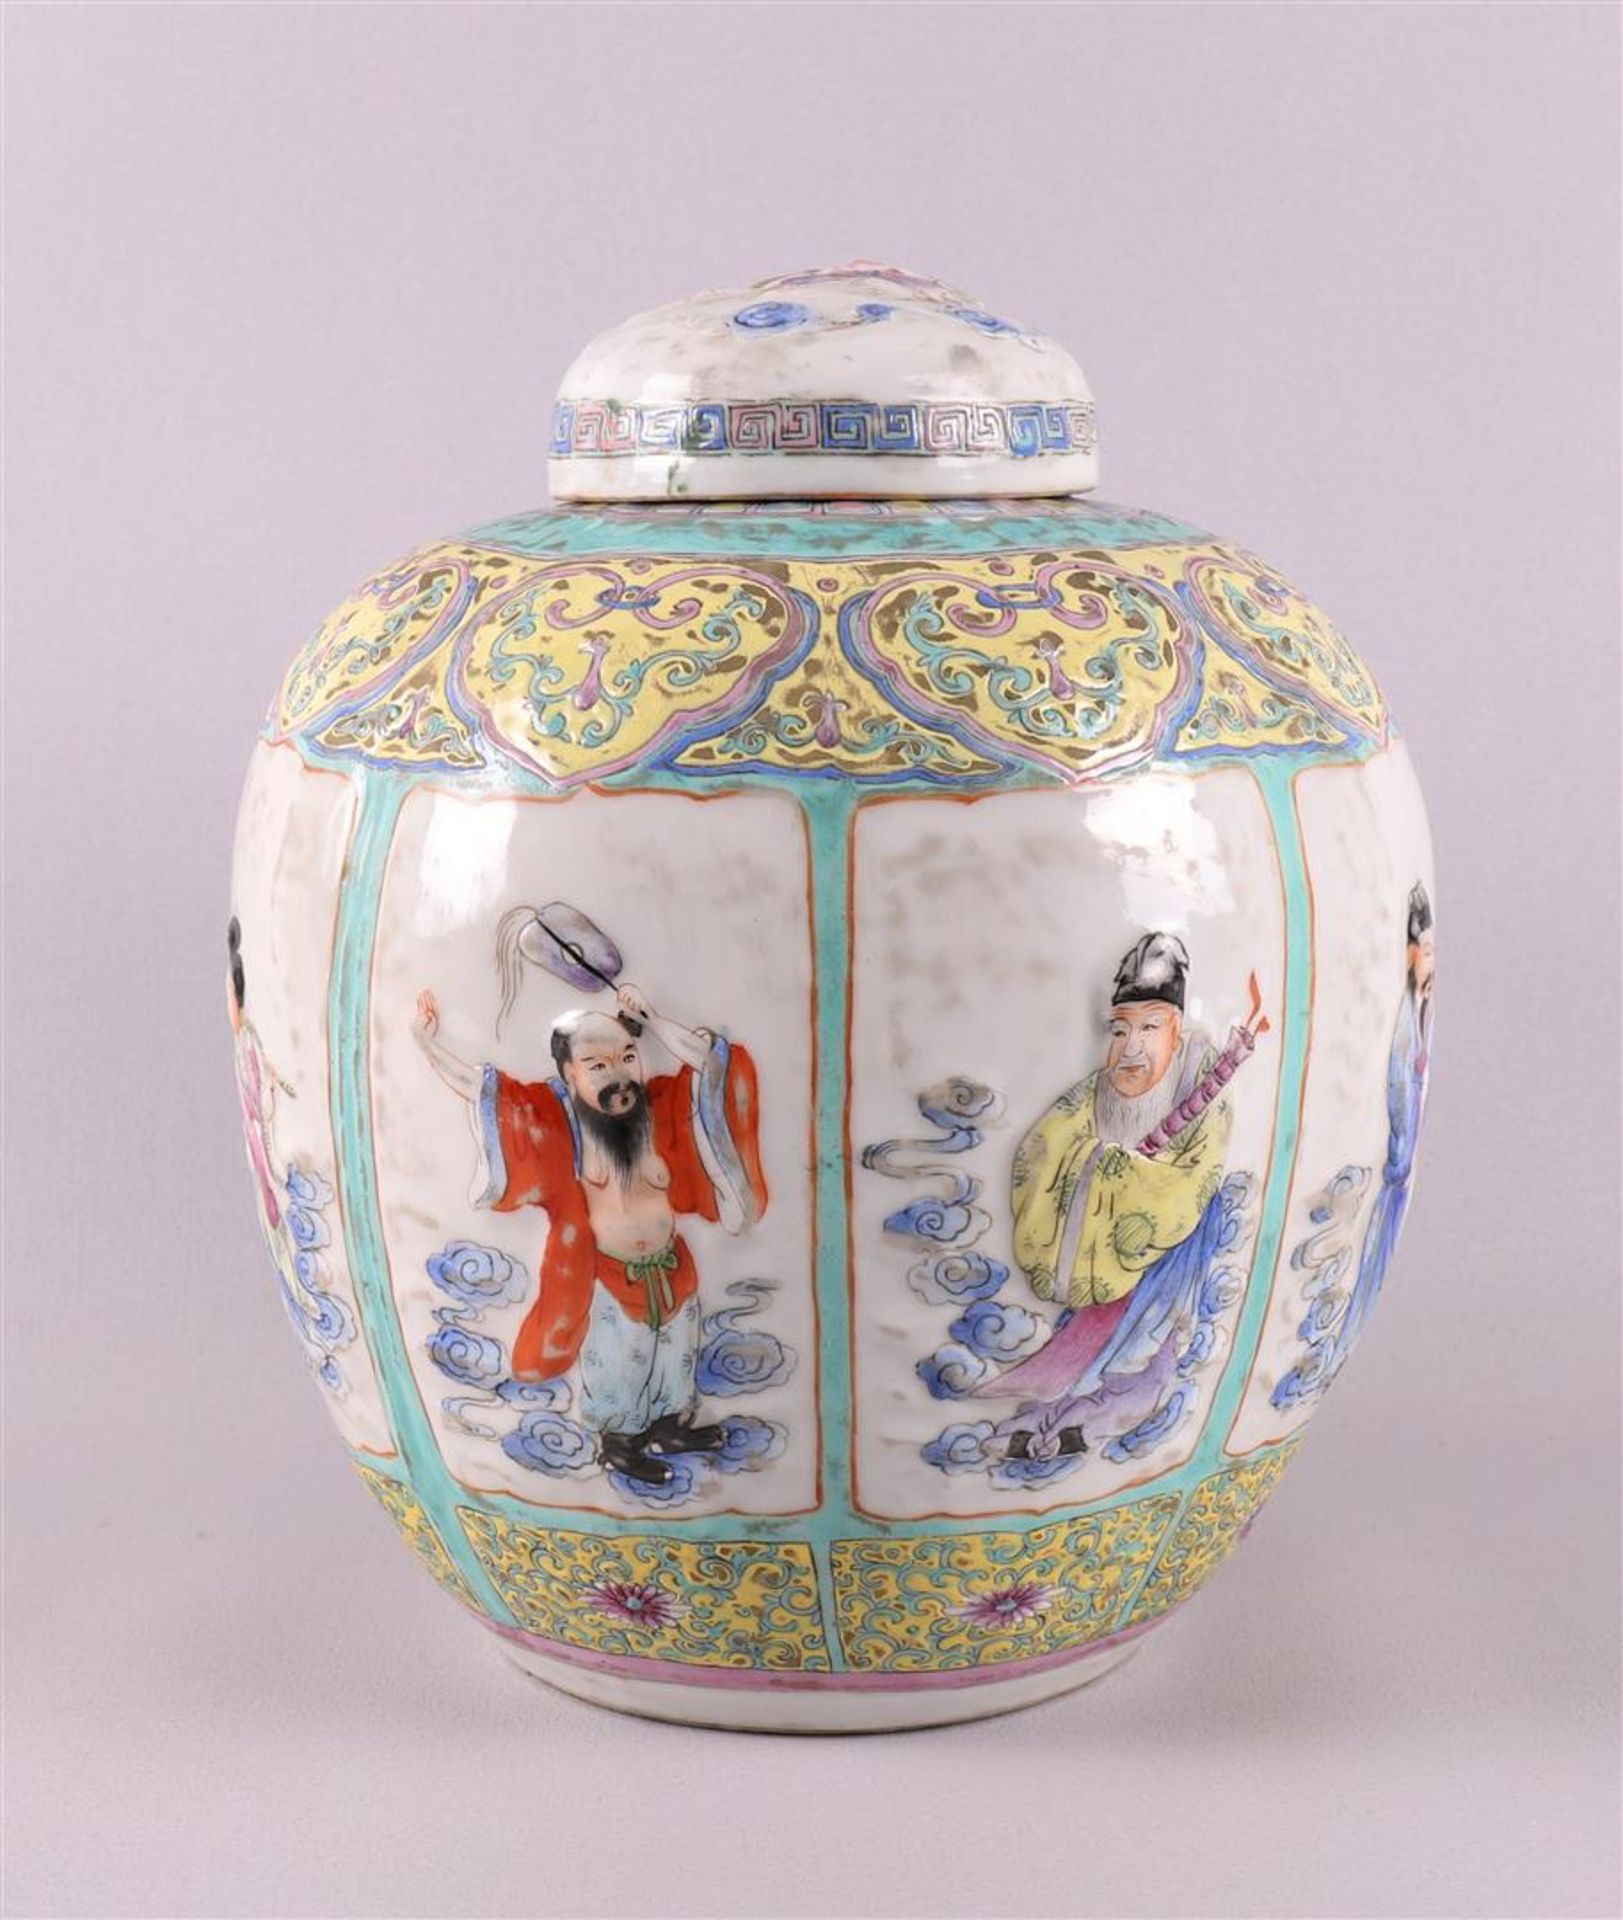 A porcelain ginger jar, China, around 1900. Polychrome relief decoration of figures in cartouches